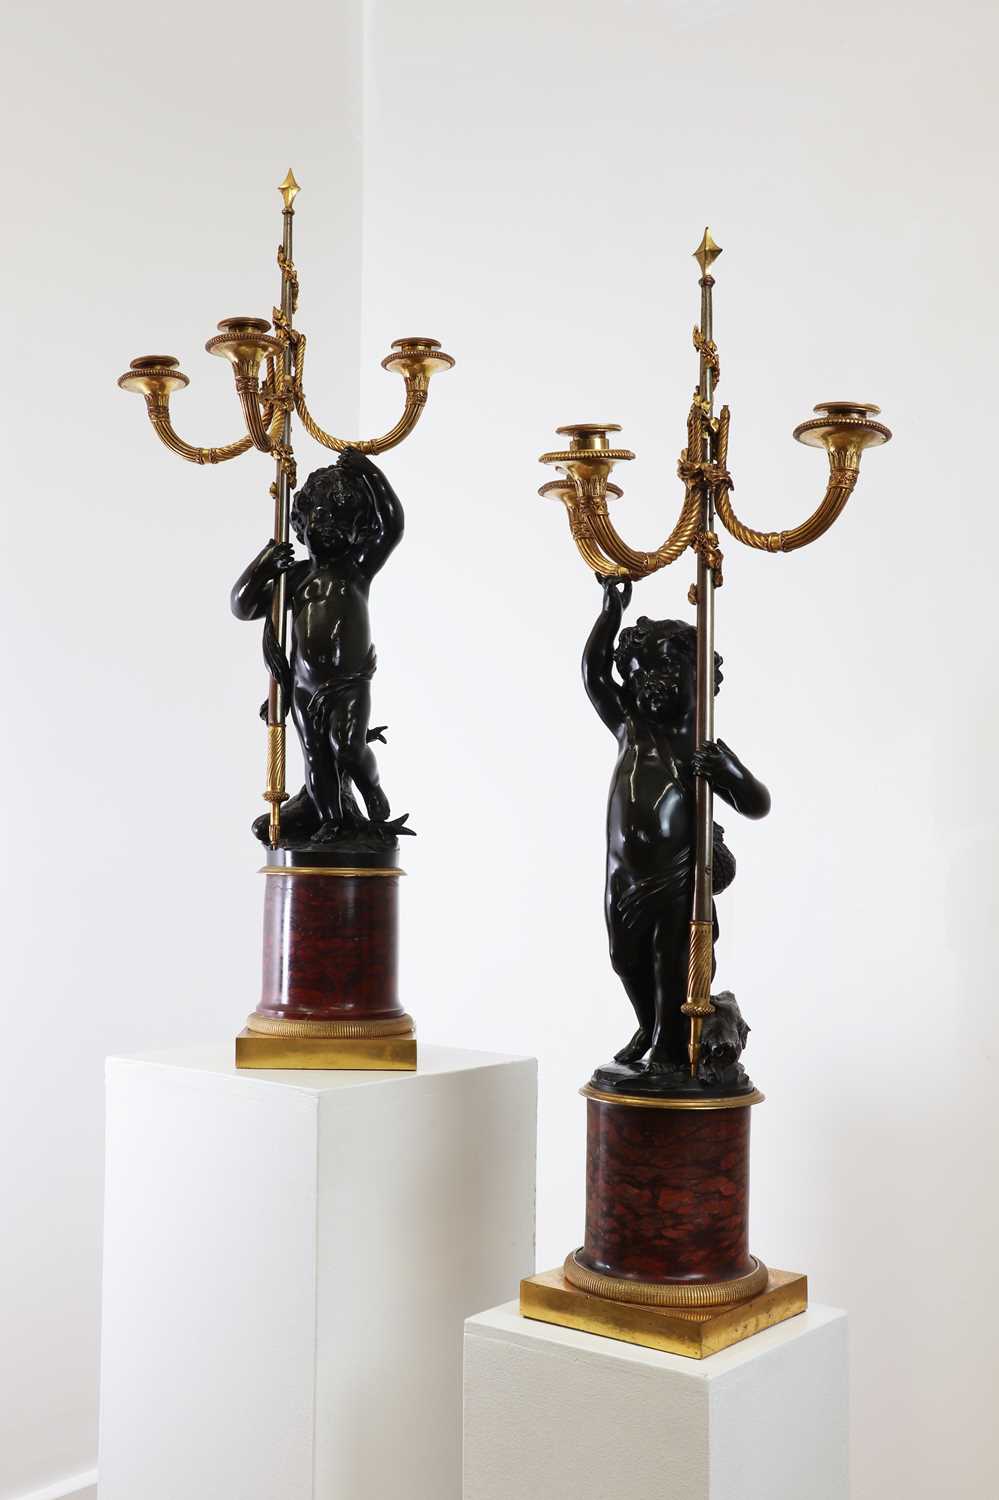 A pair of French Empire bronze and marble candelabra attributed to François Rémond (c.1747-1812), - Image 10 of 23